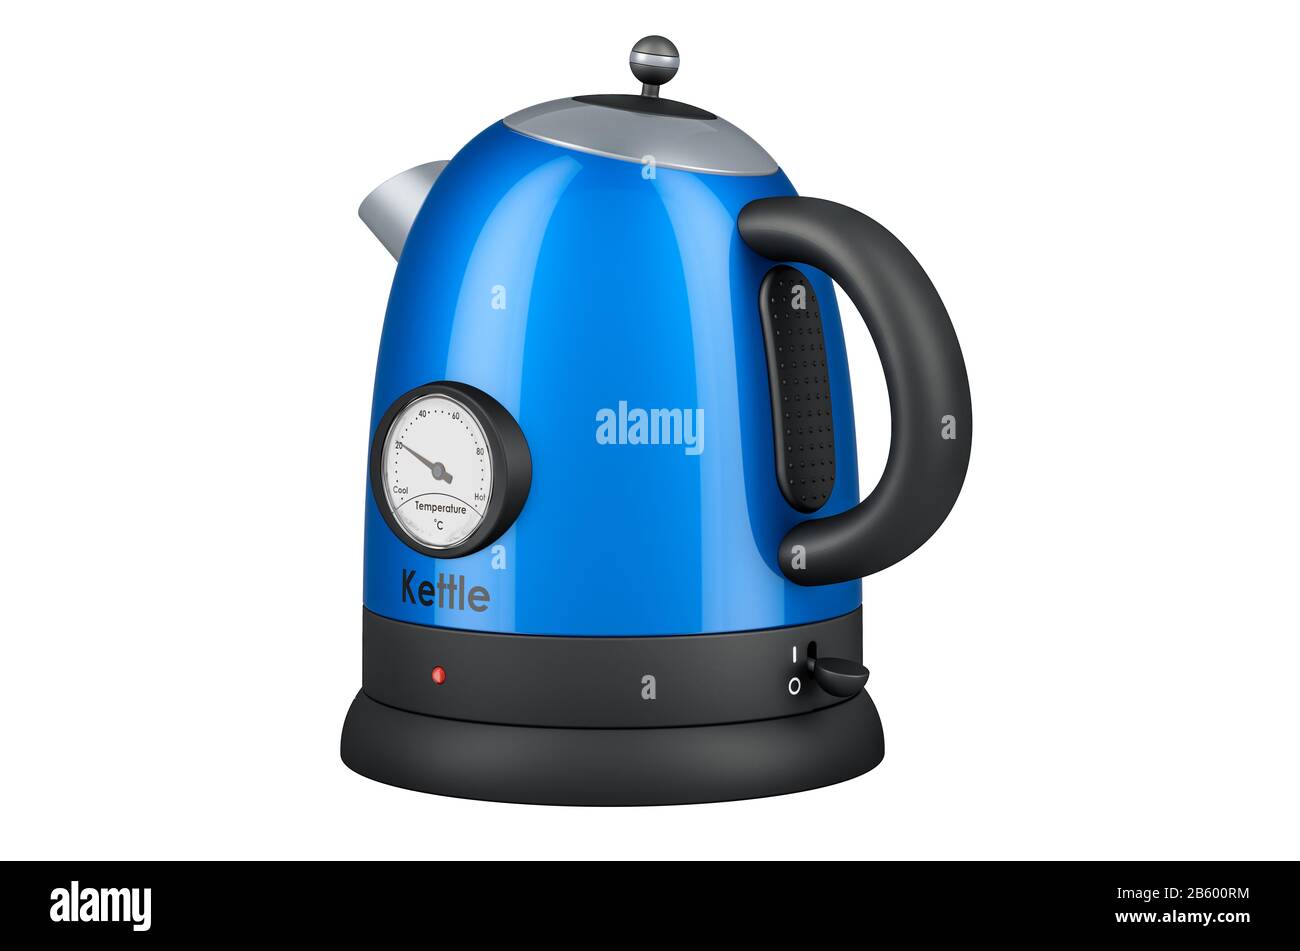 https://c8.alamy.com/comp/2B600RM/blue-electric-kettle-retro-design-3d-rendering-isolated-on-white-background-2B600RM.jpg